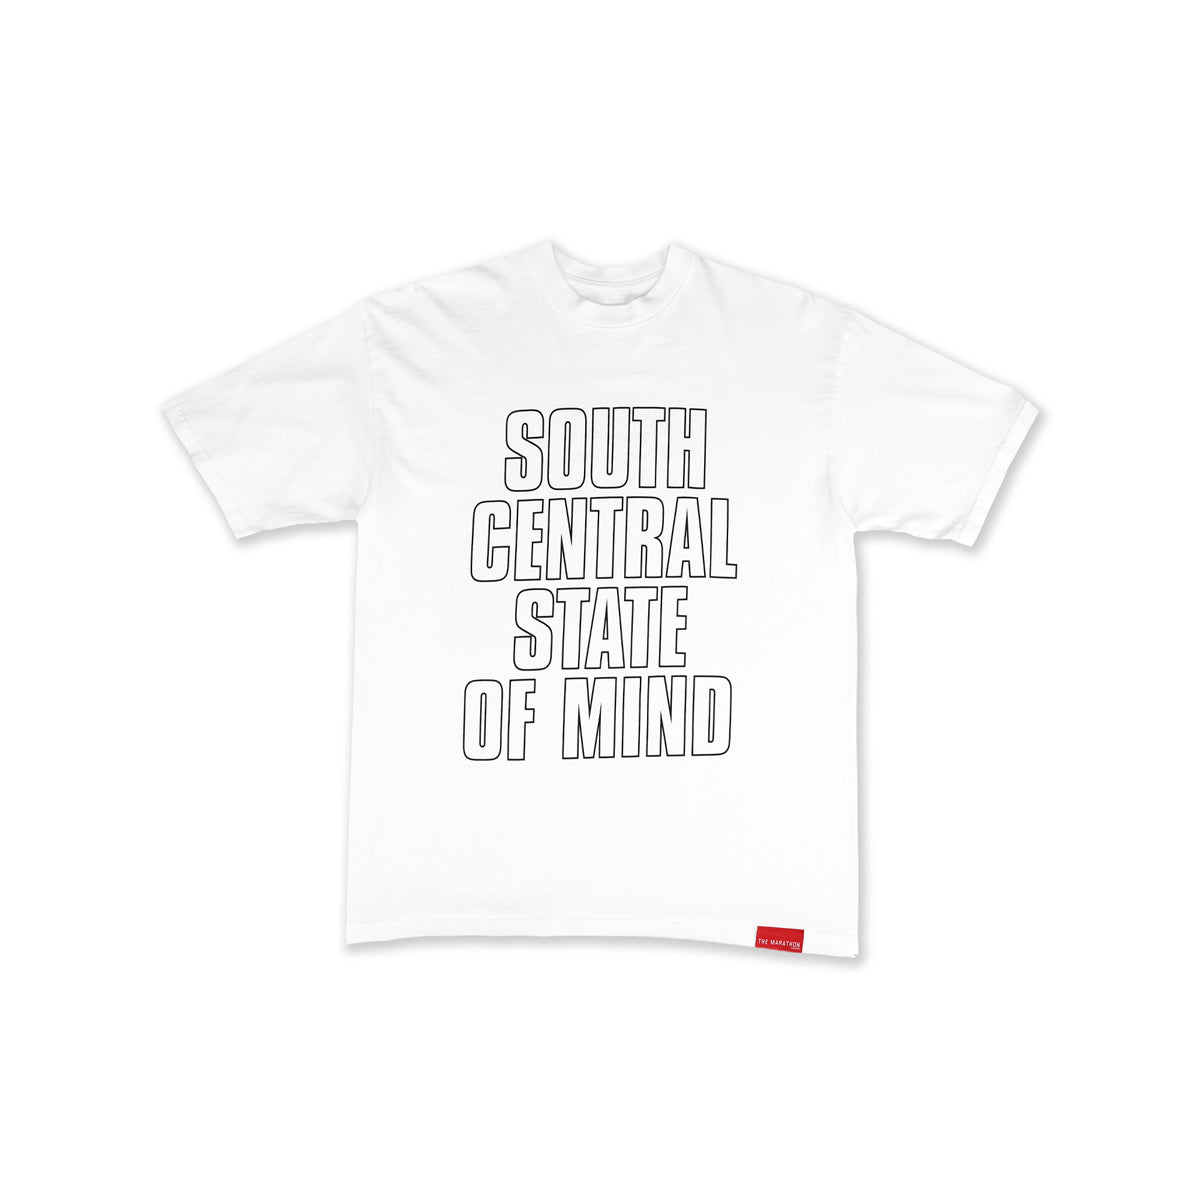 South Central State of Mind T-Shirt - White/Black - Front